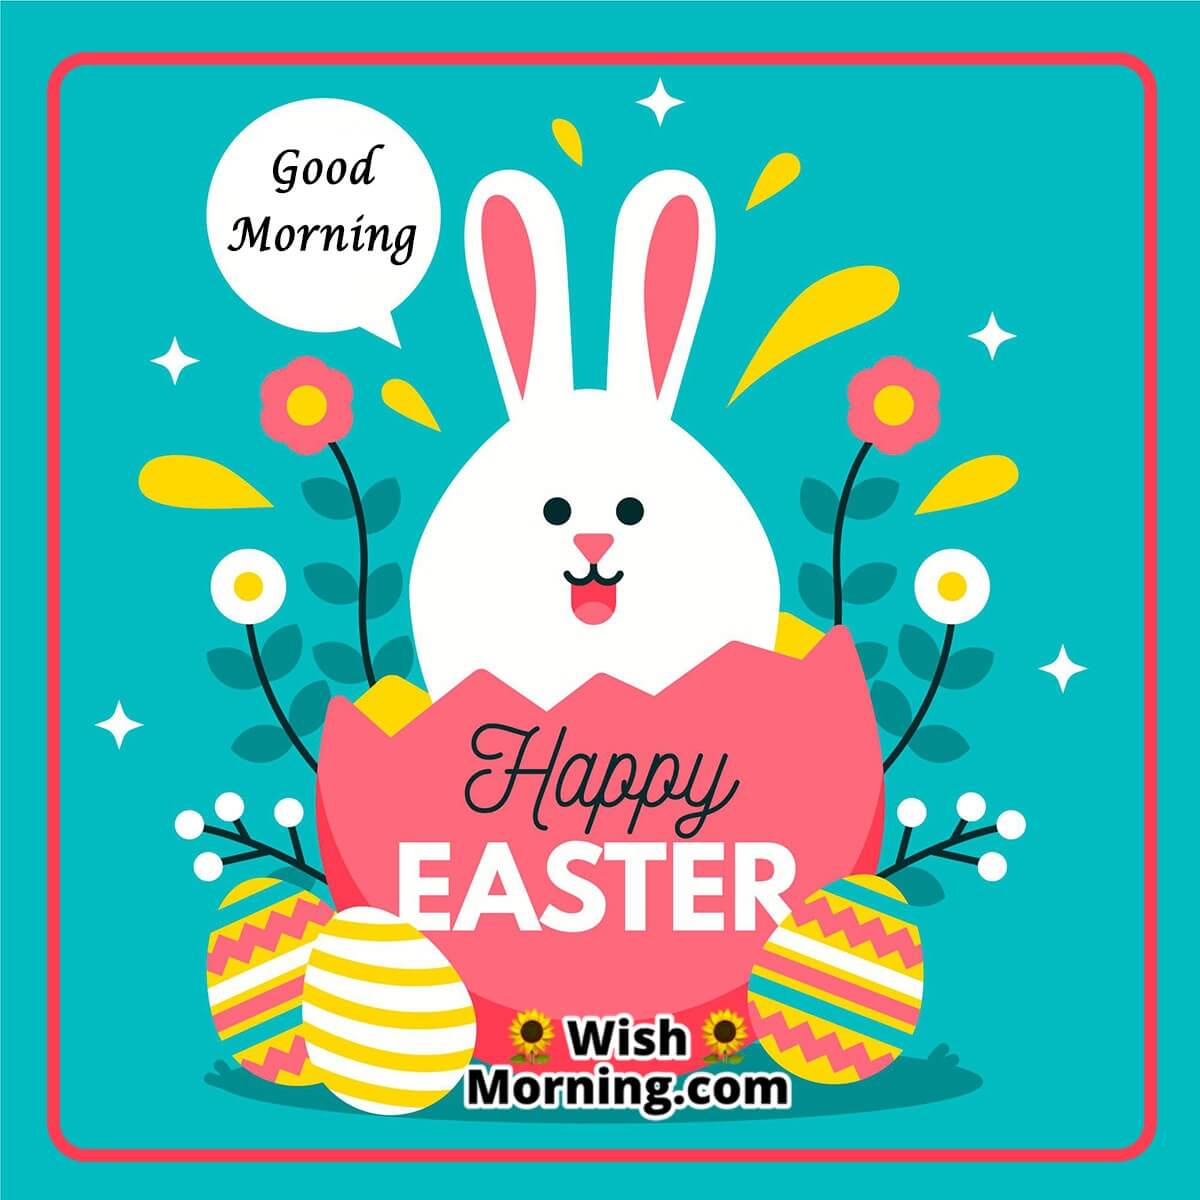 Good Morning Happy Easter